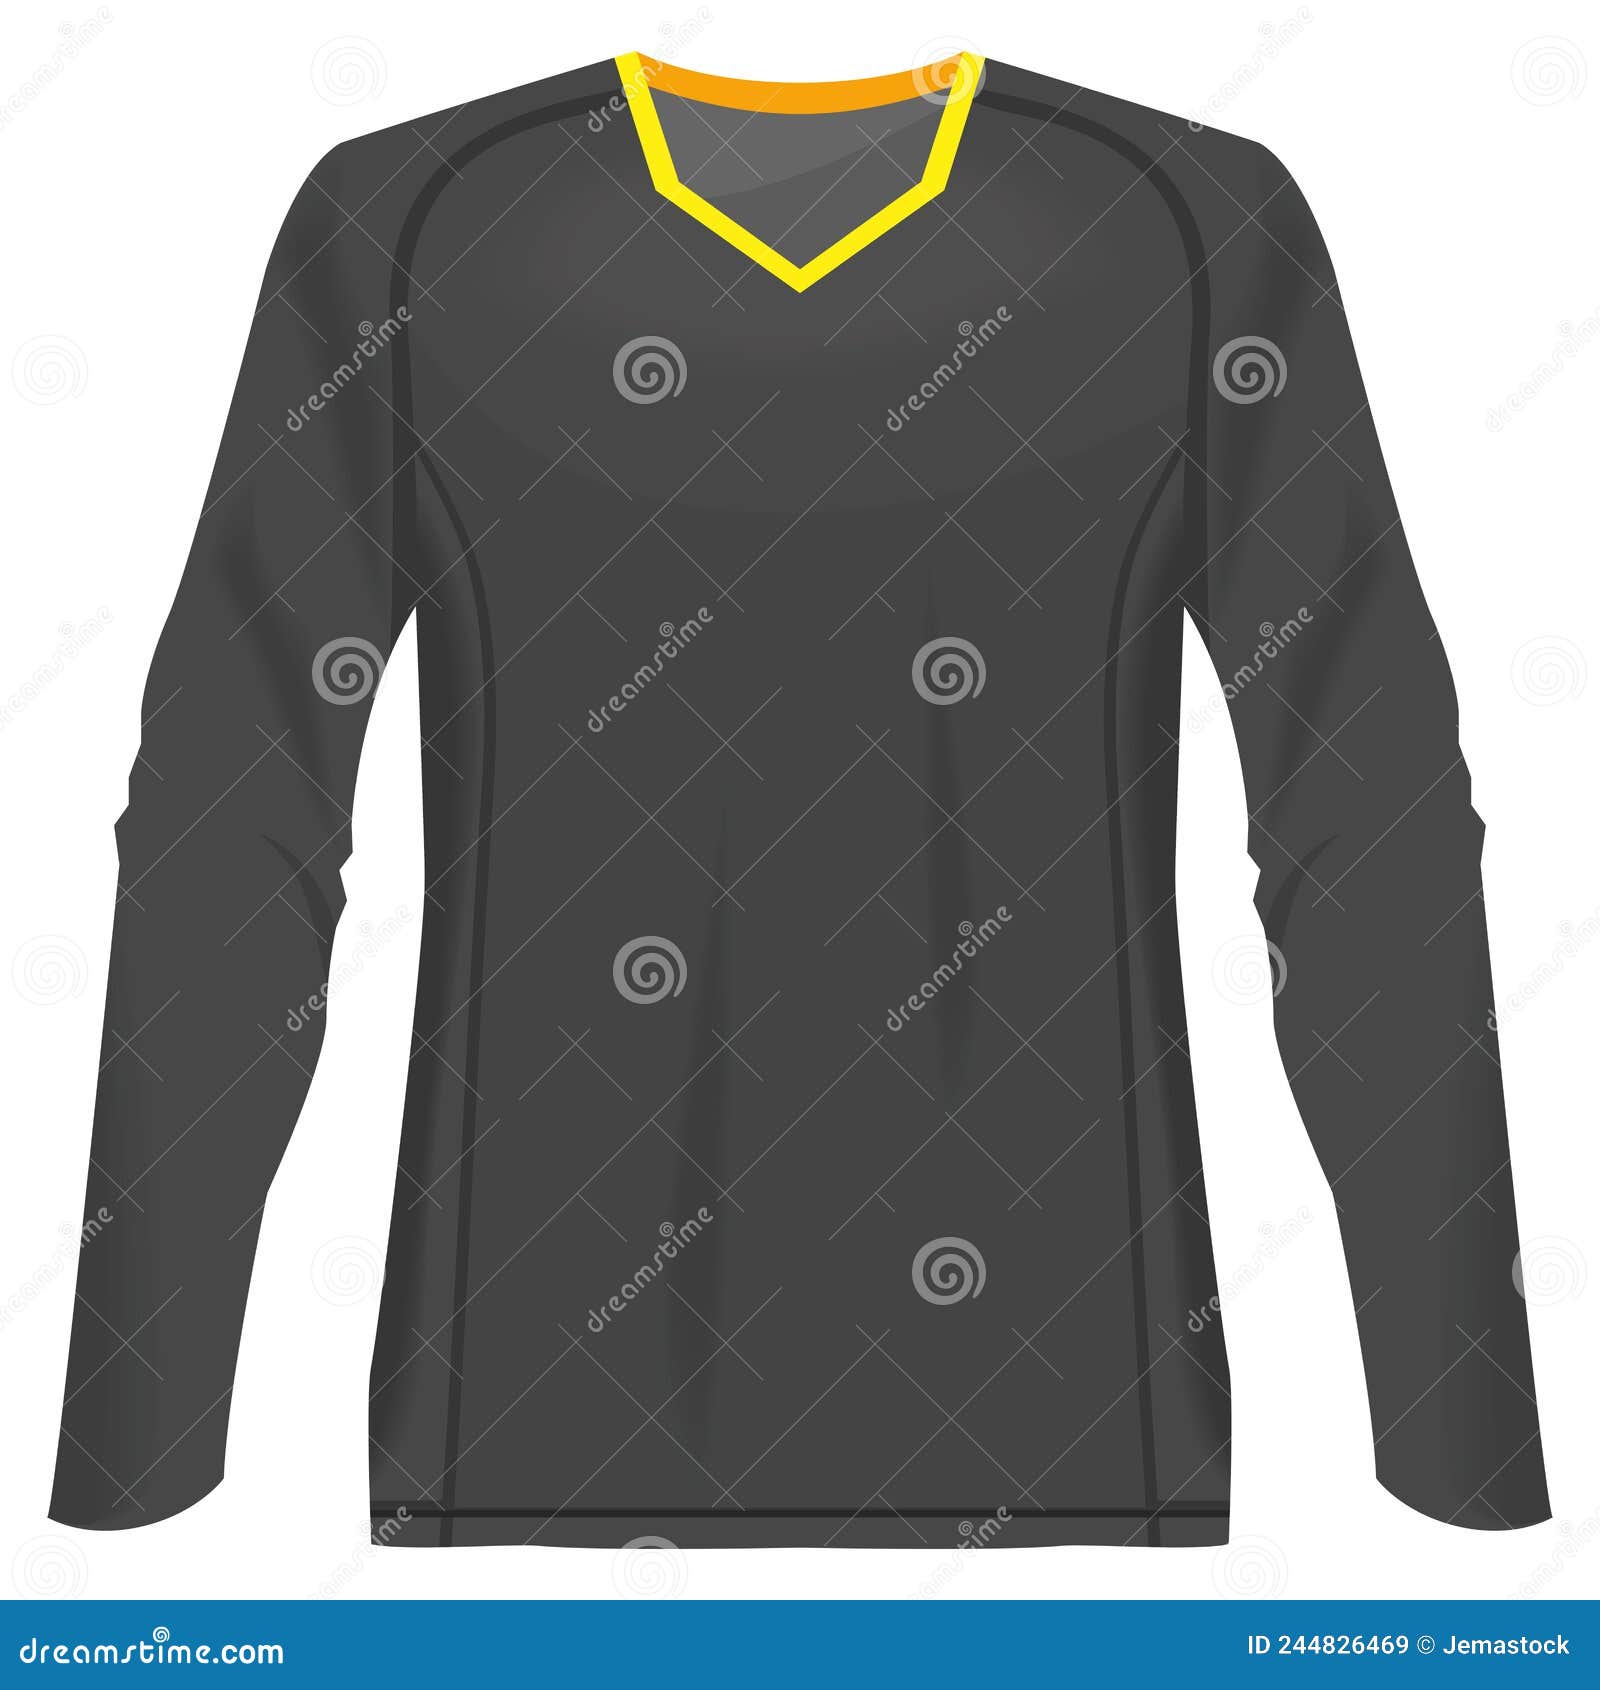 Long sleeve jersey front stock vector. Illustration of vector - 244826469